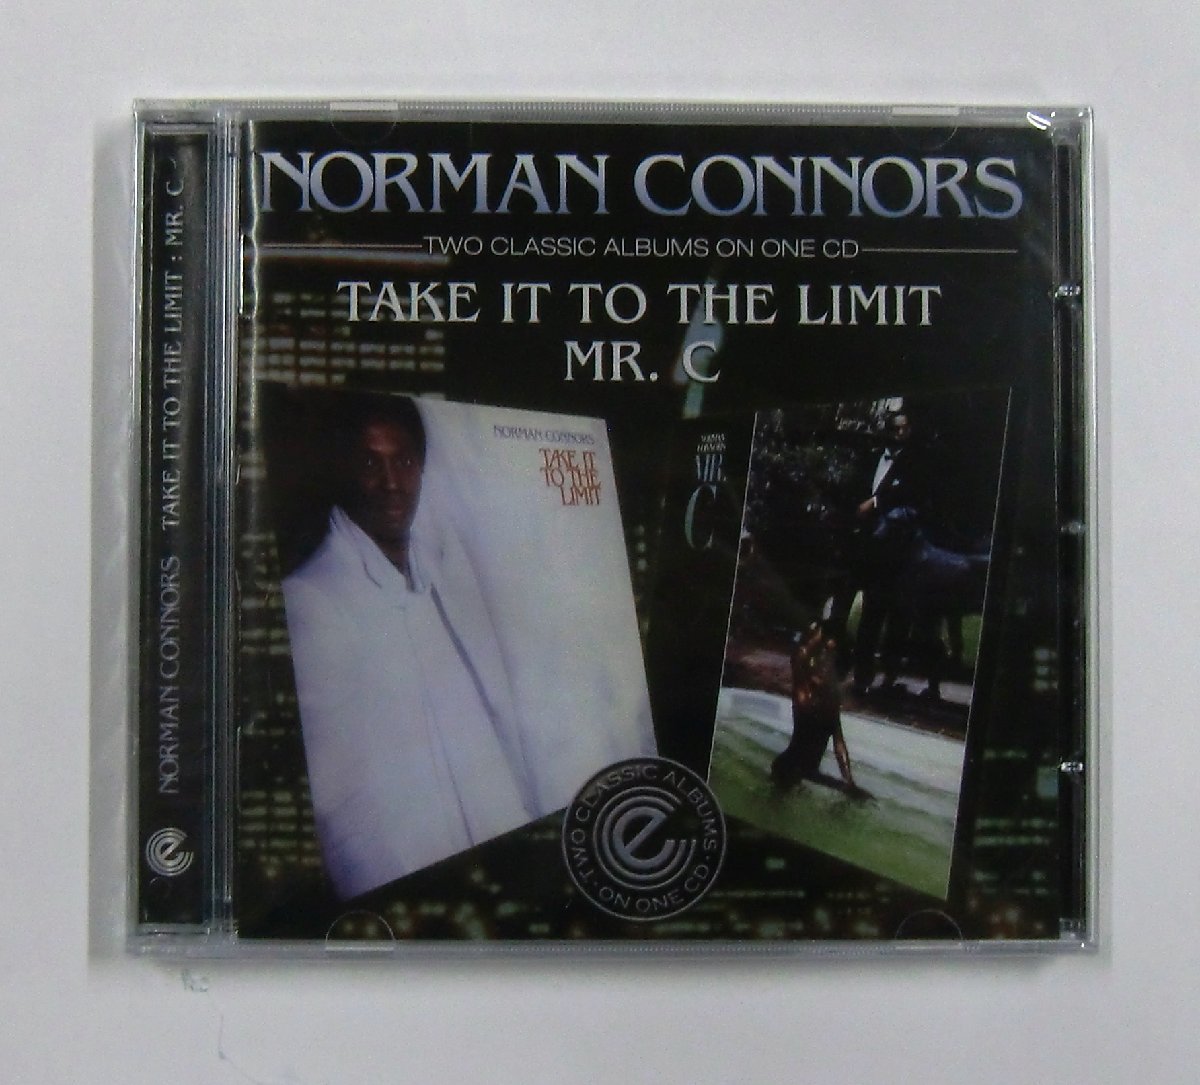 CD NORMAN CONNORS Norman *kona-z/ Take It To The Limit / Mr. C [sa739]